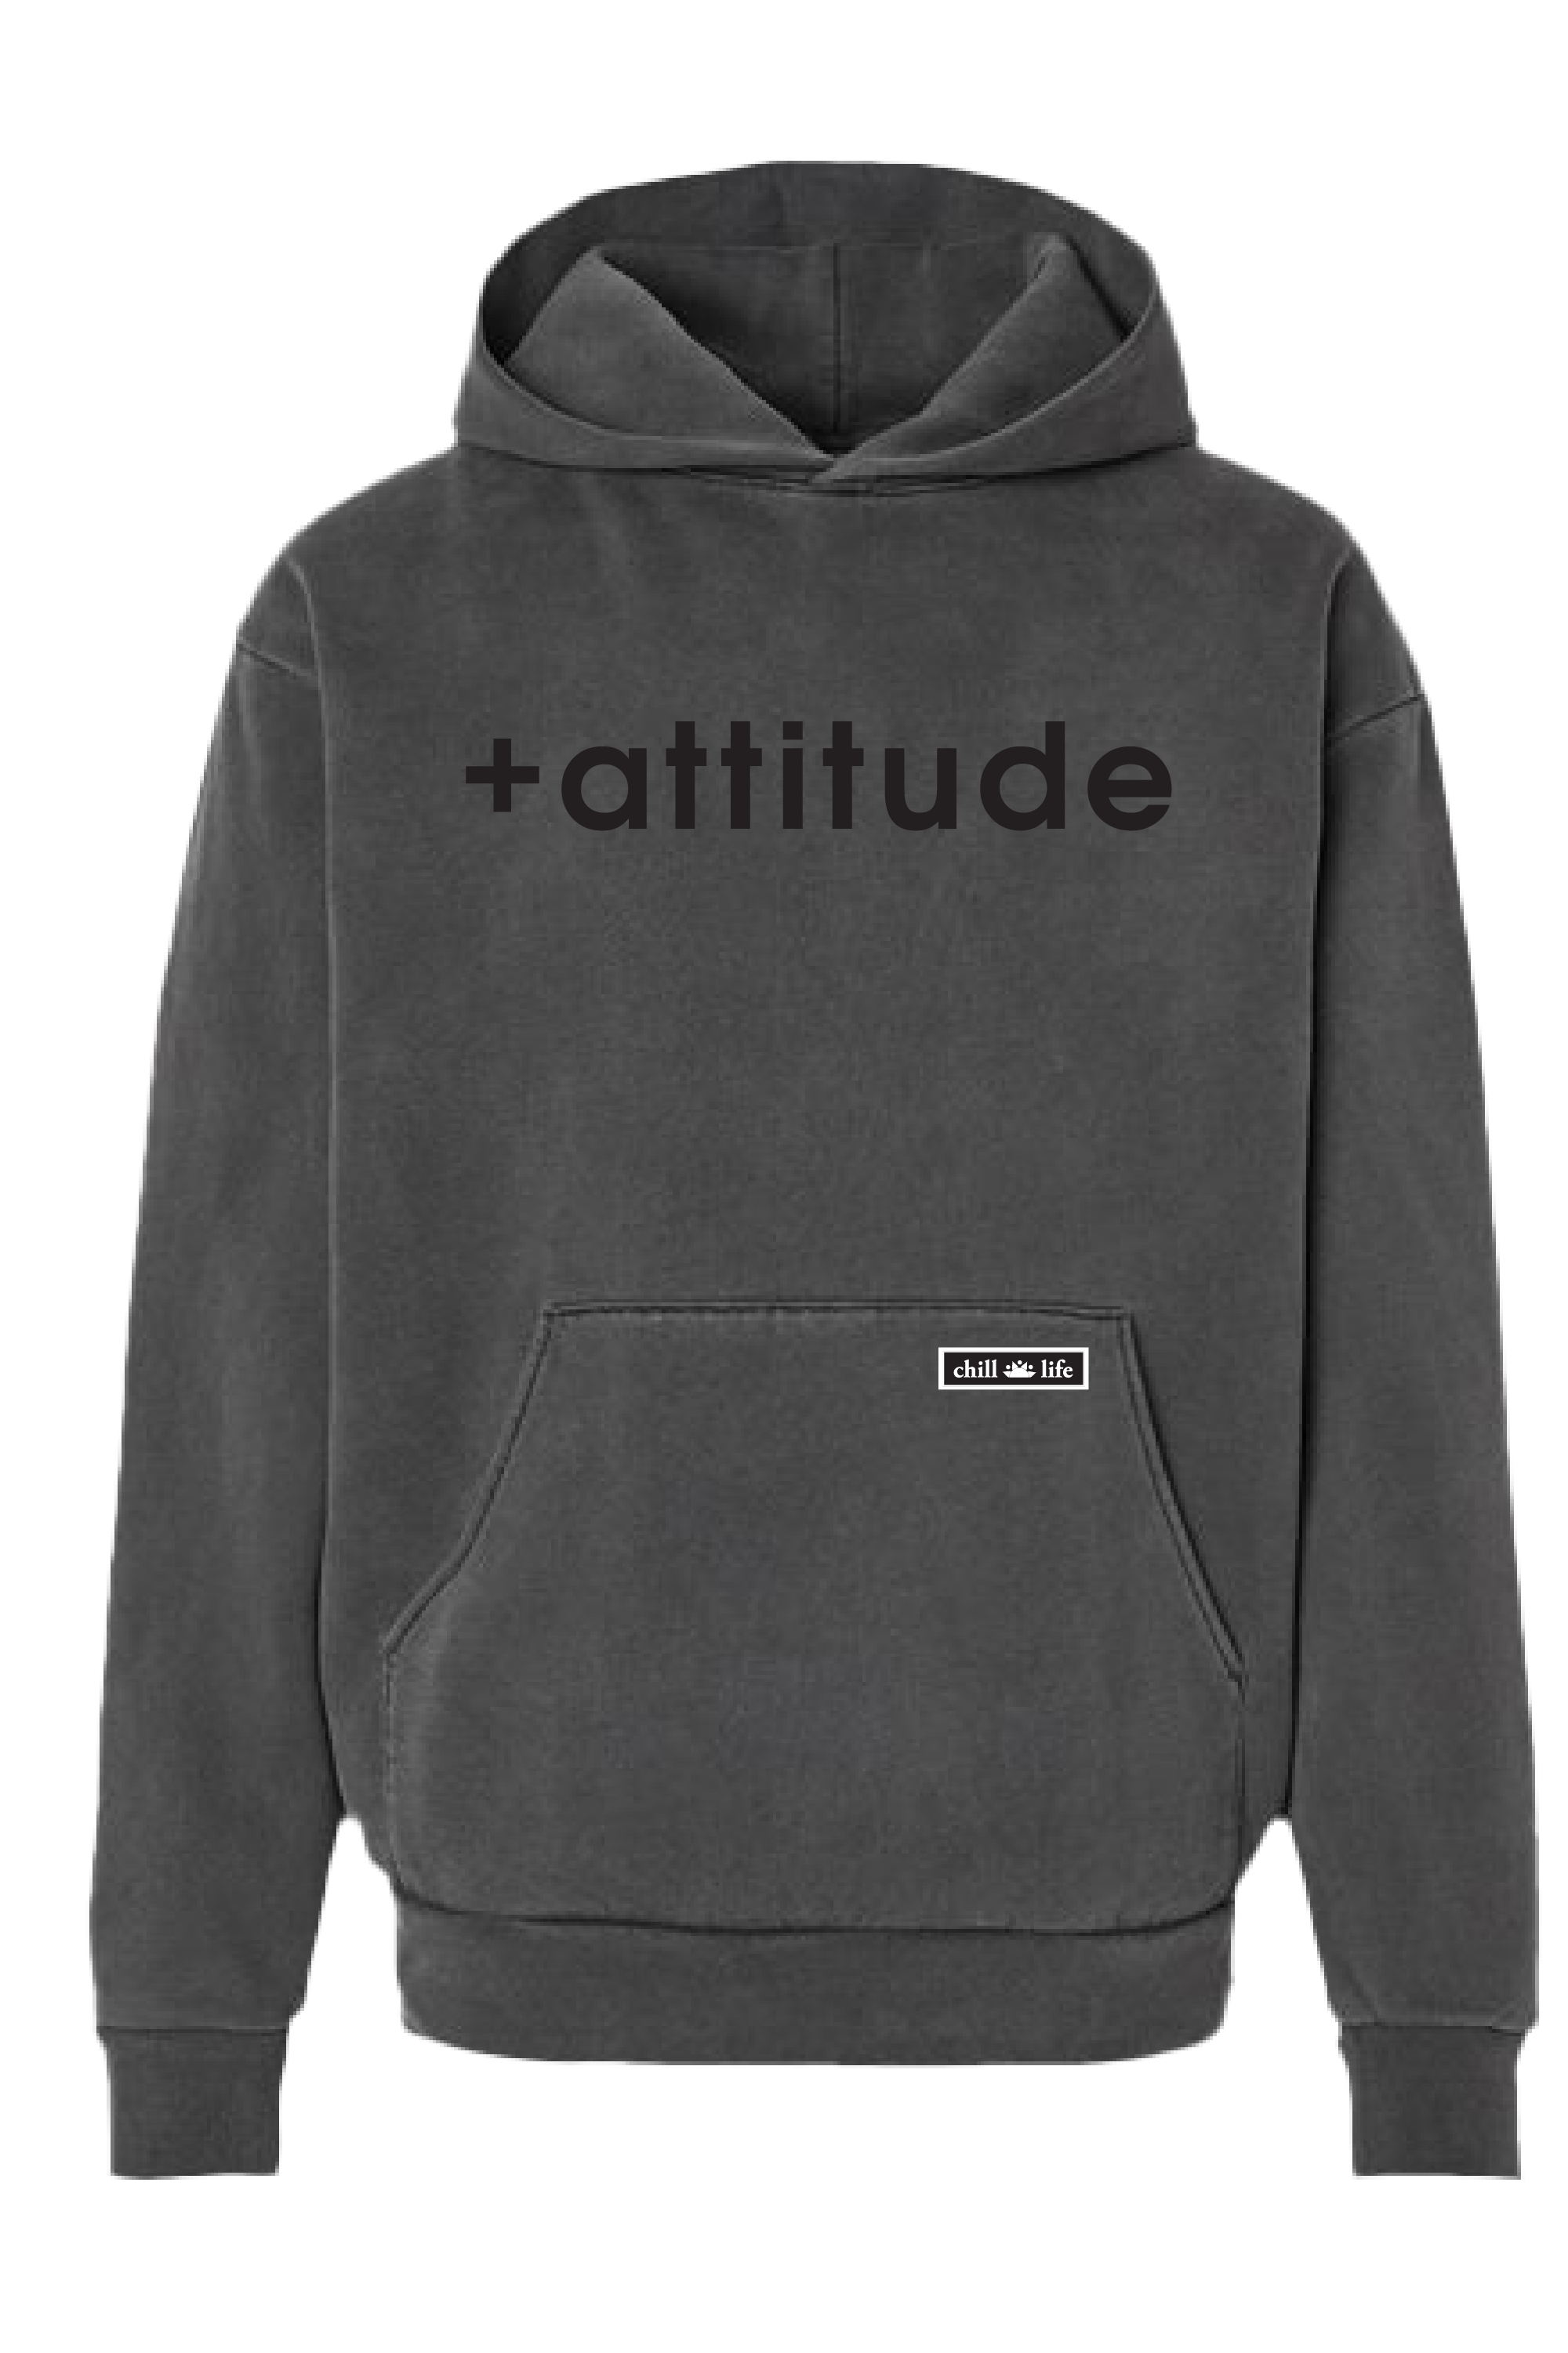 +attitude Hoodie - Vintage Charcoal chill life style